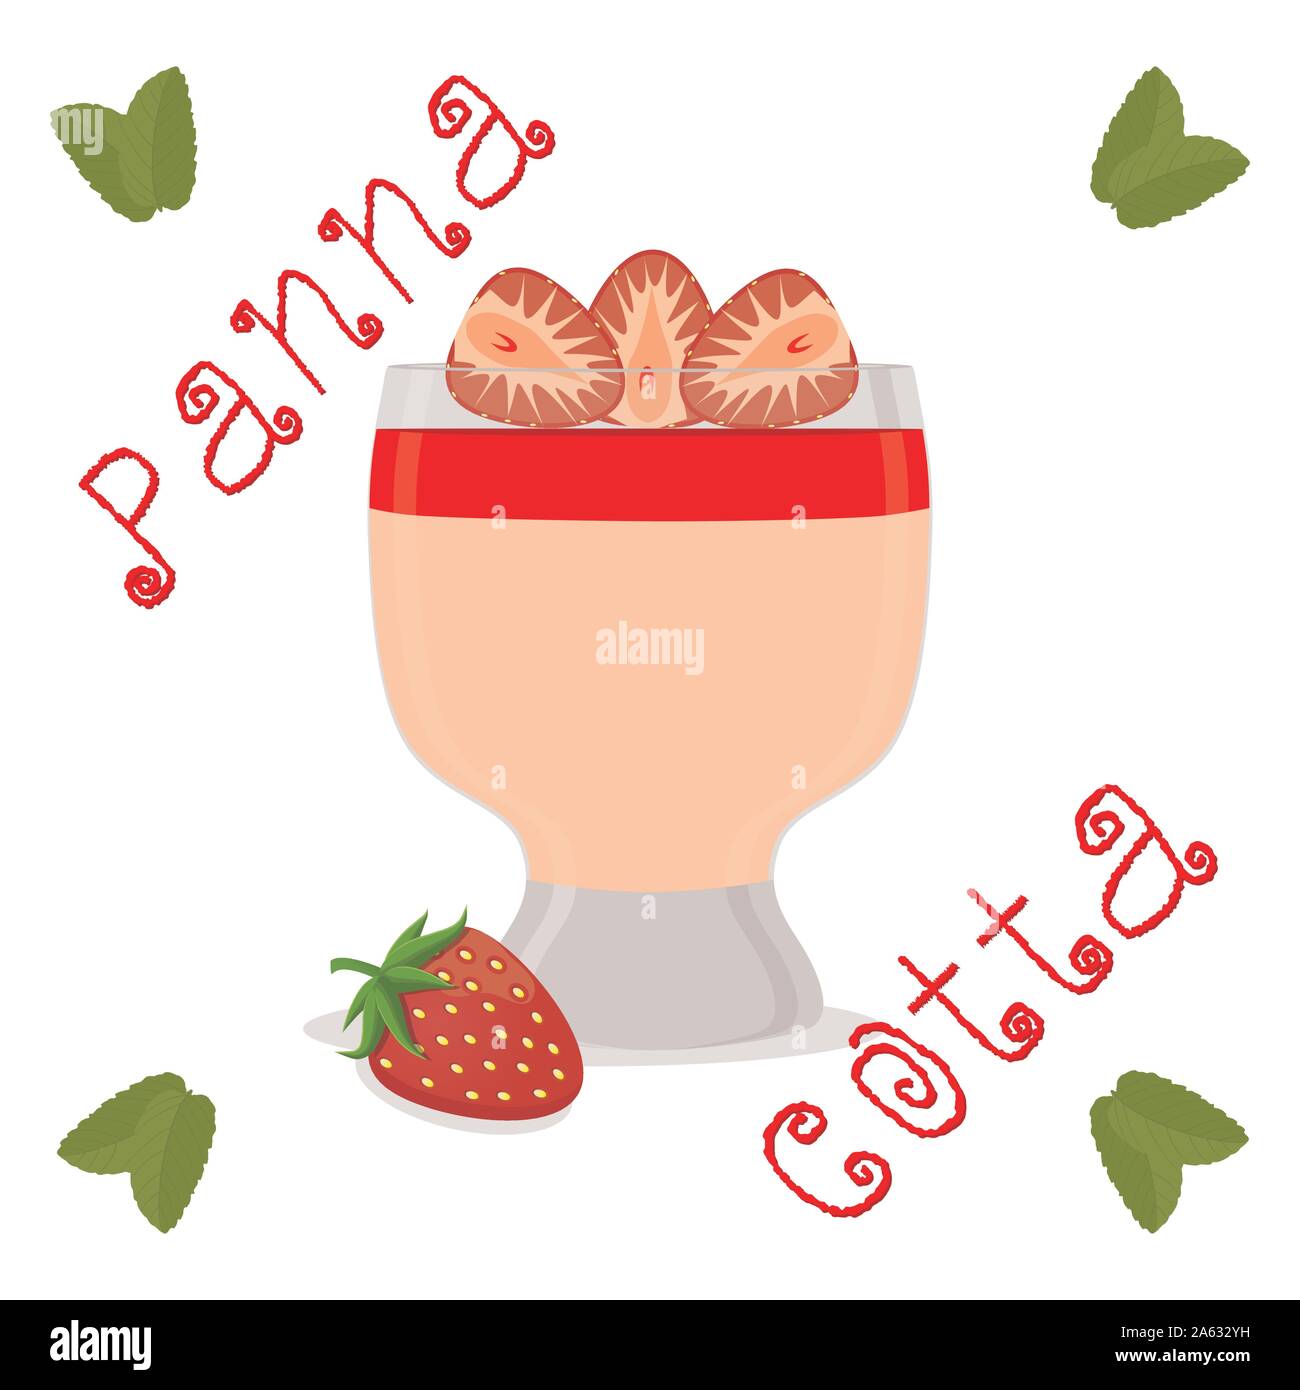 Abstract vector icon illustration logo for jelly strawberry panna cotta. Jelly pattern consisting of natural design sweet food pudding pannacotta. Eat Stock Vector